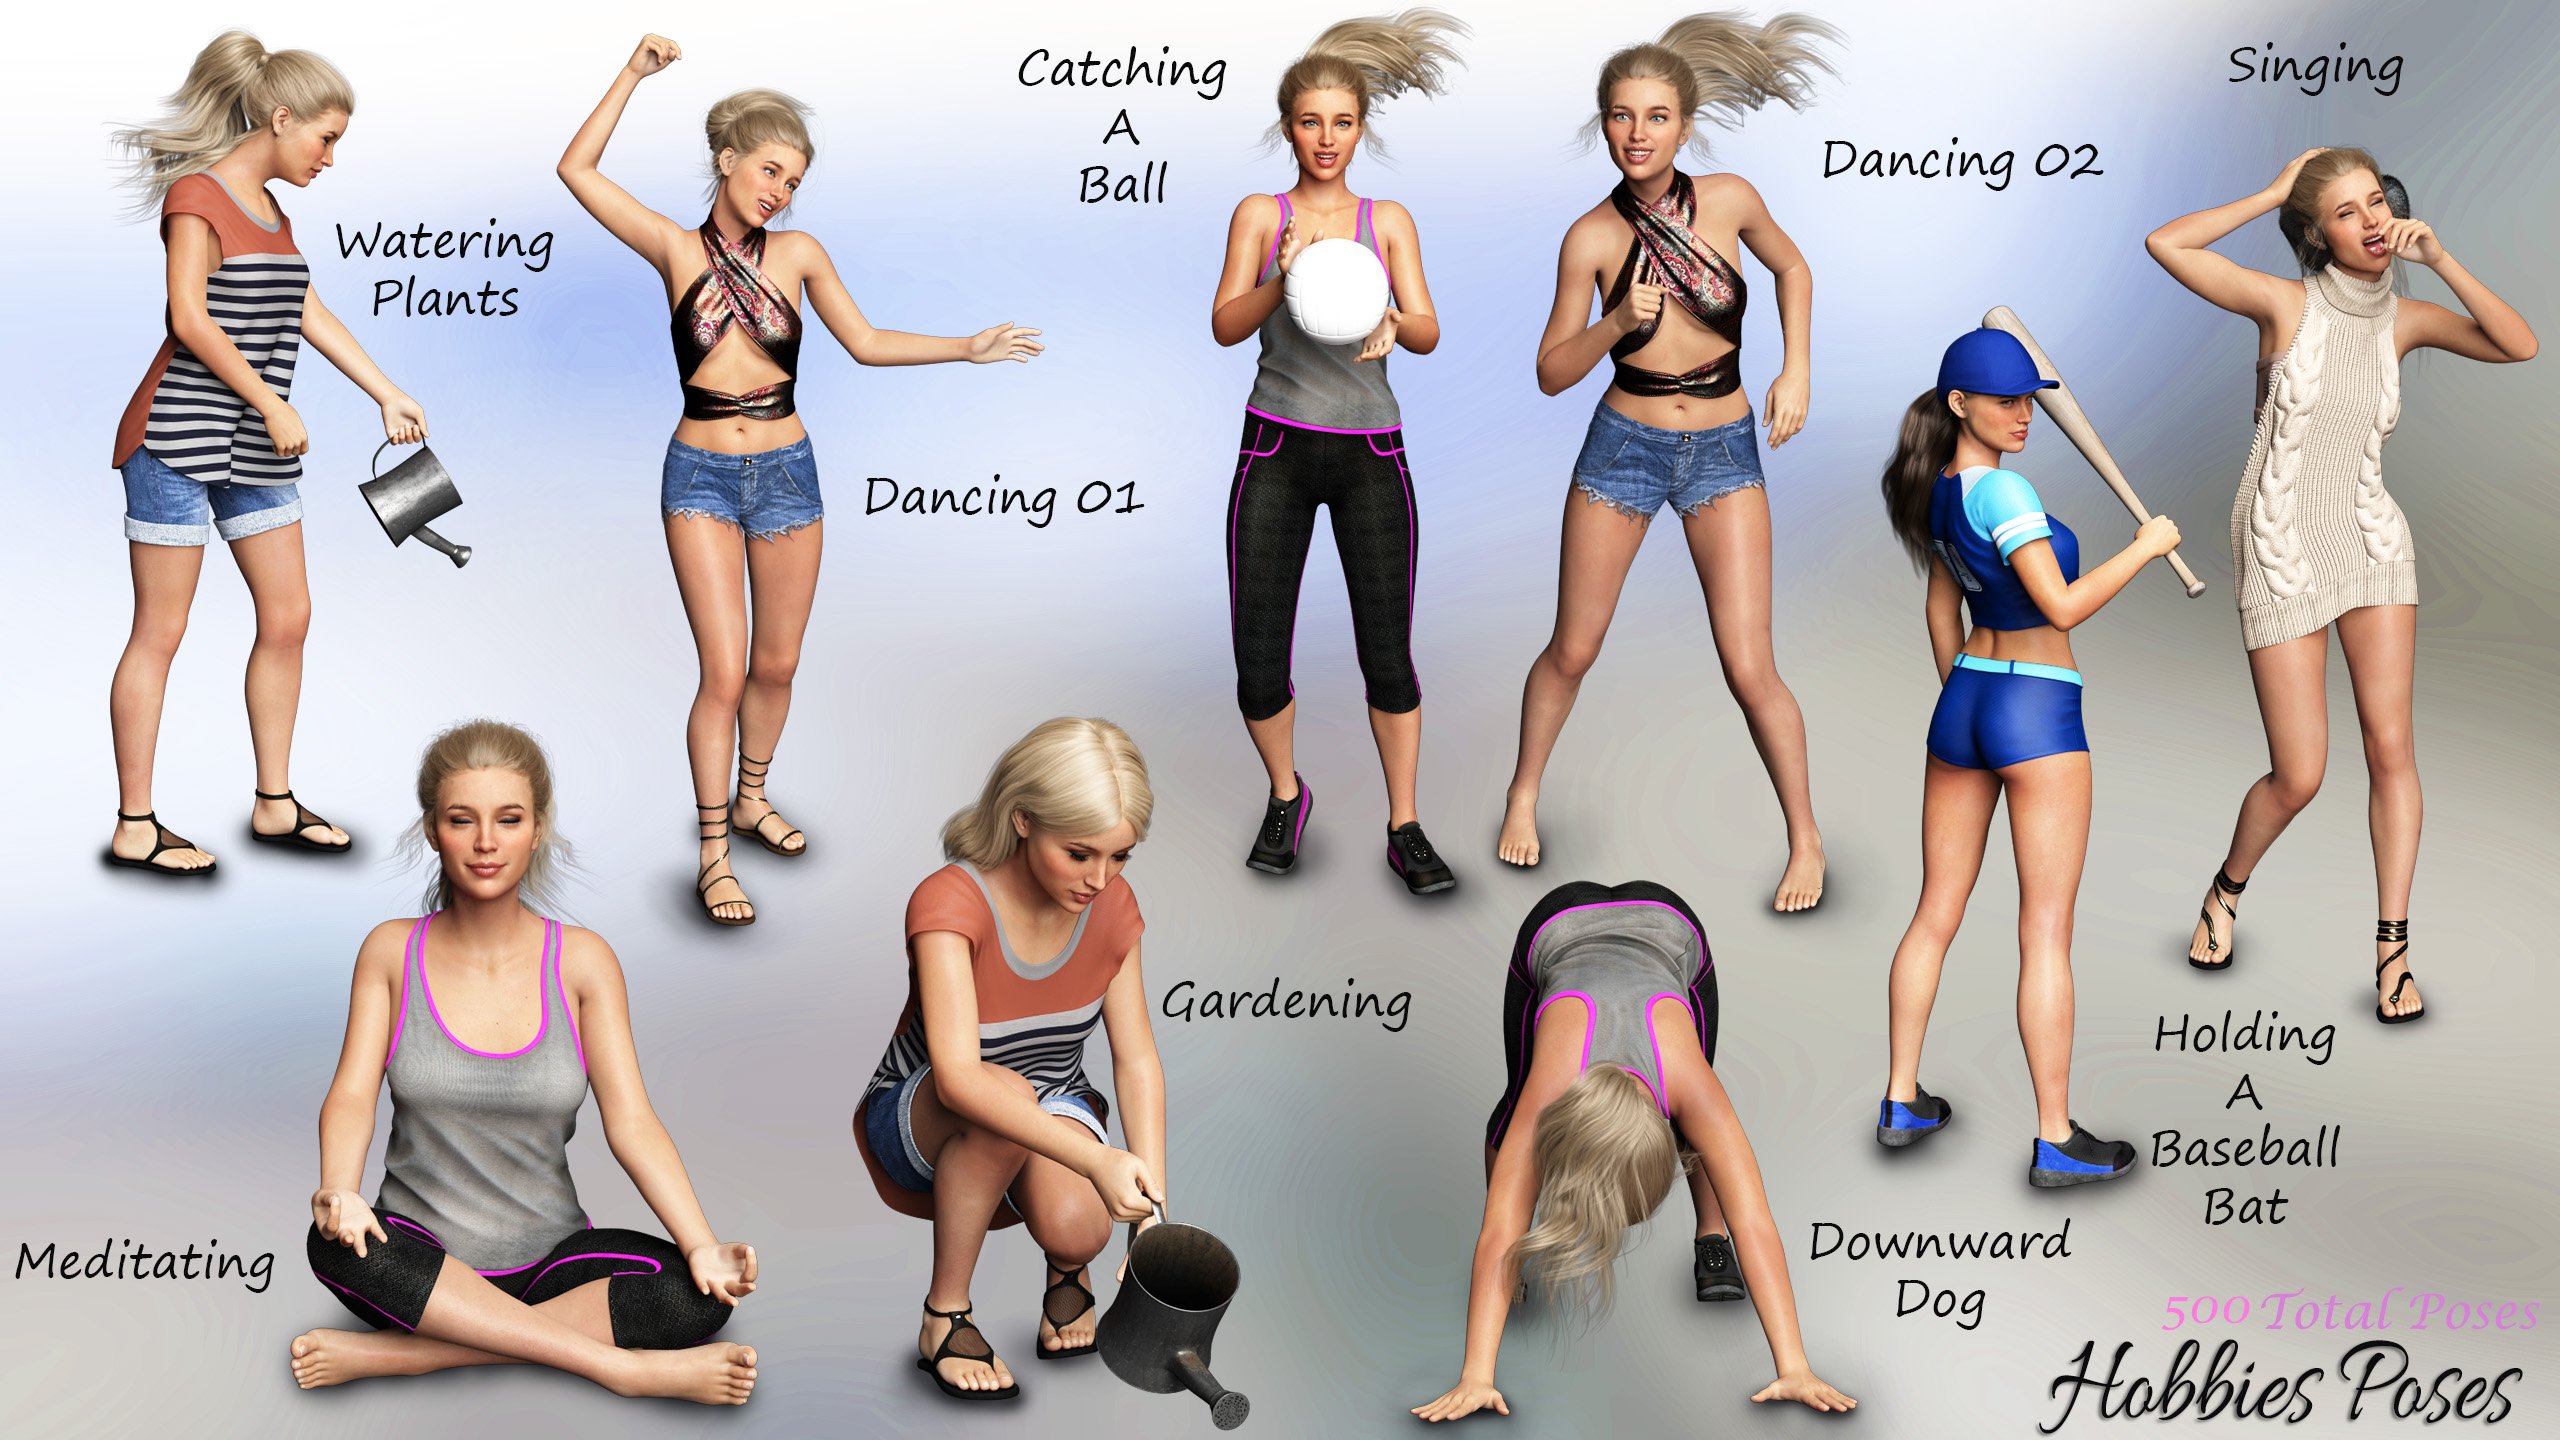 iG 100 Must Have Poses for Genesis 8 Female(s) by: i3D_LotusValery3D, 3D Models by Daz 3D